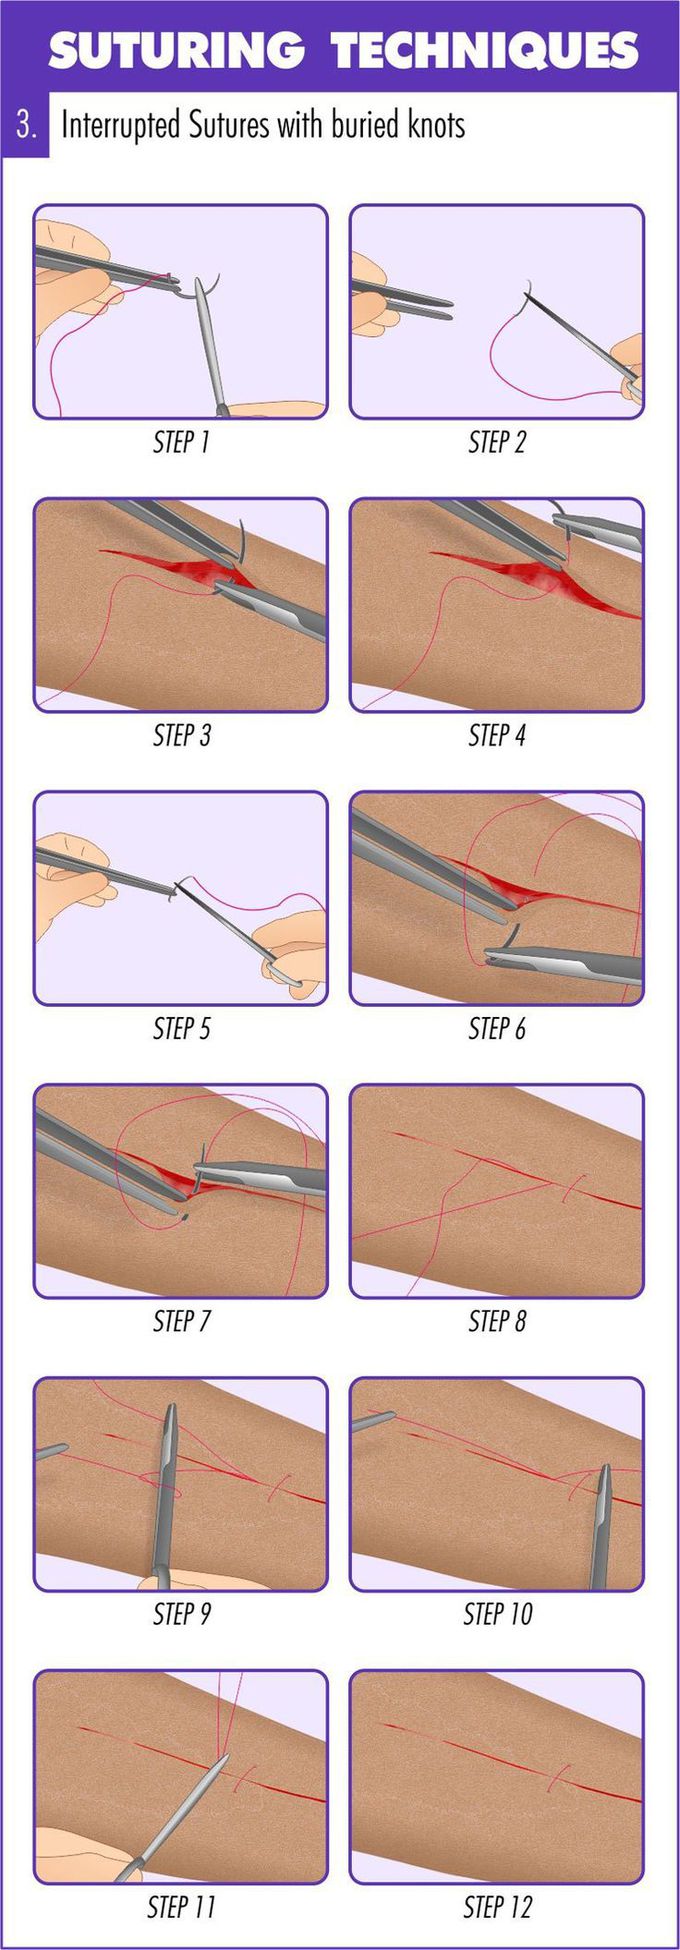 Complete Guide to Mastering Suturing Techniques | Medical education, Suture techniques, Medical knowledge